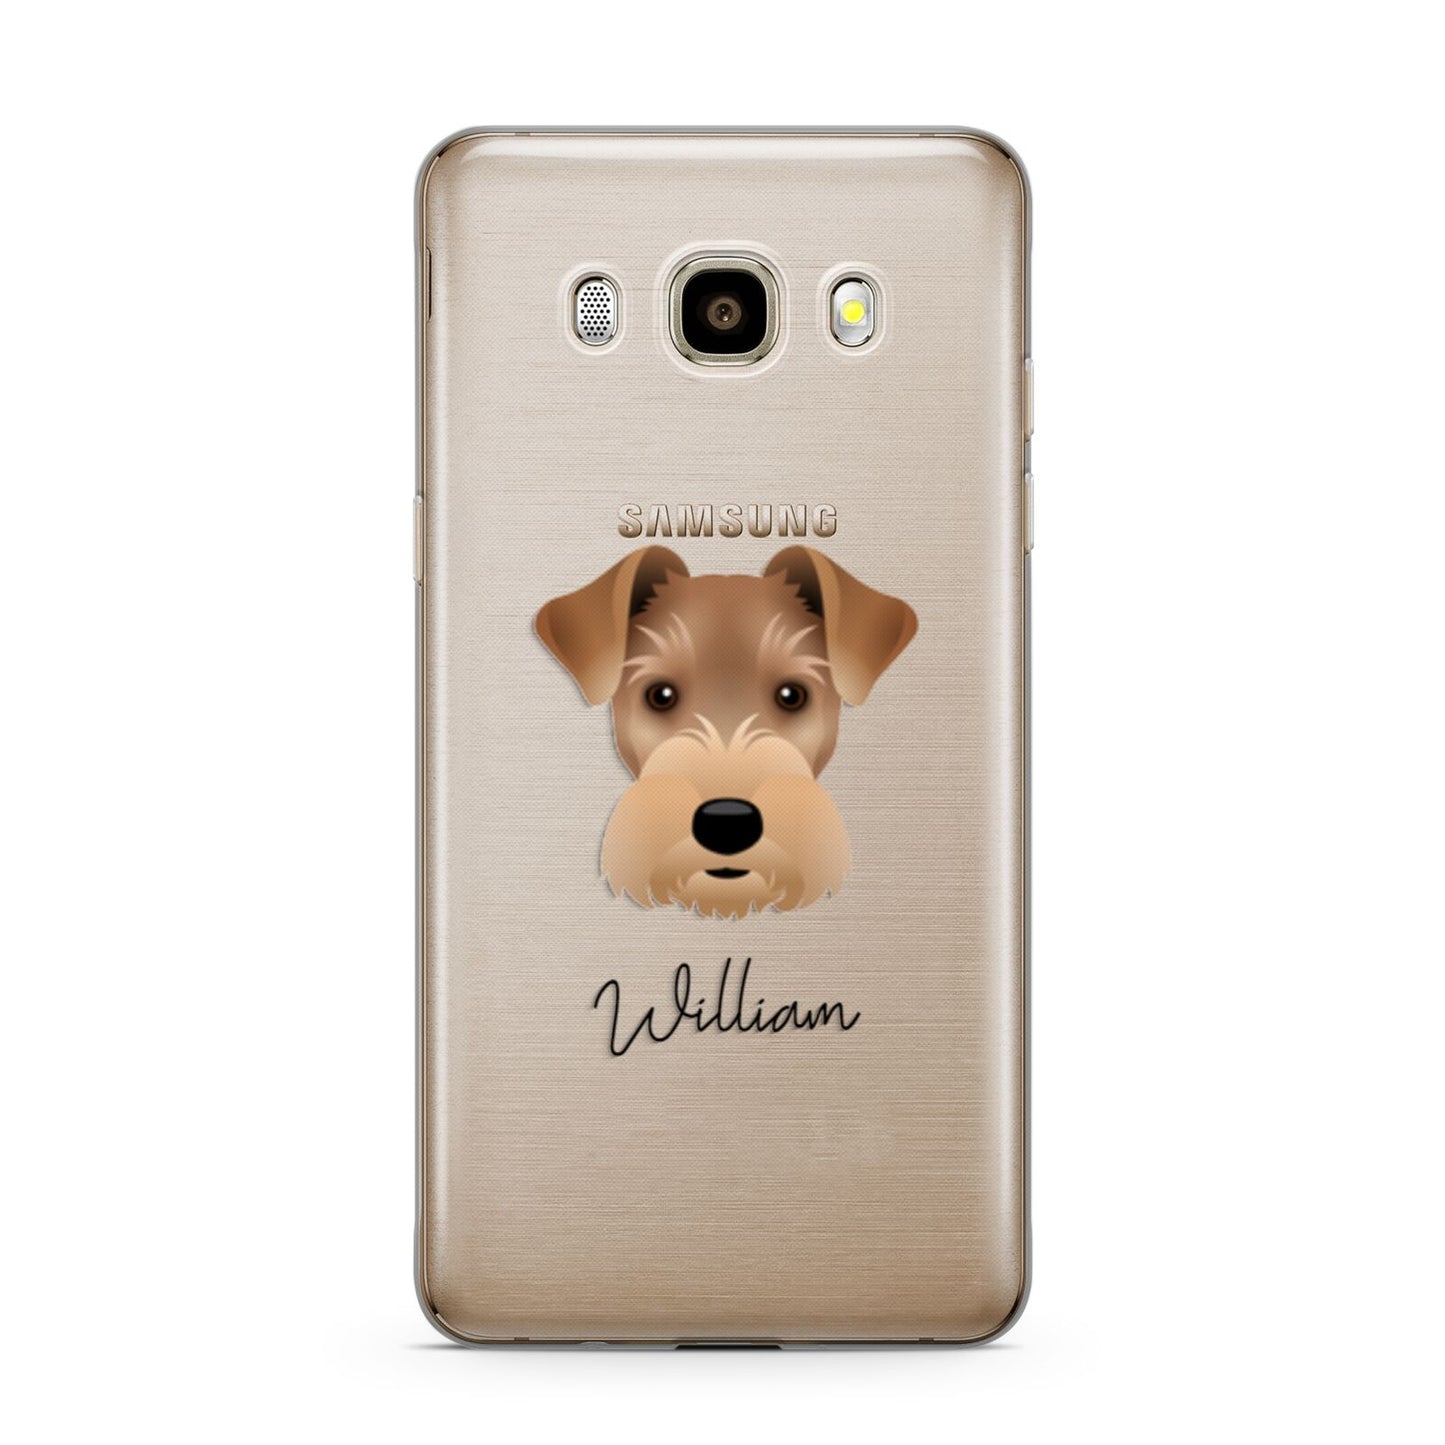 Welsh Terrier Personalised Samsung Galaxy J7 2016 Case on gold phone